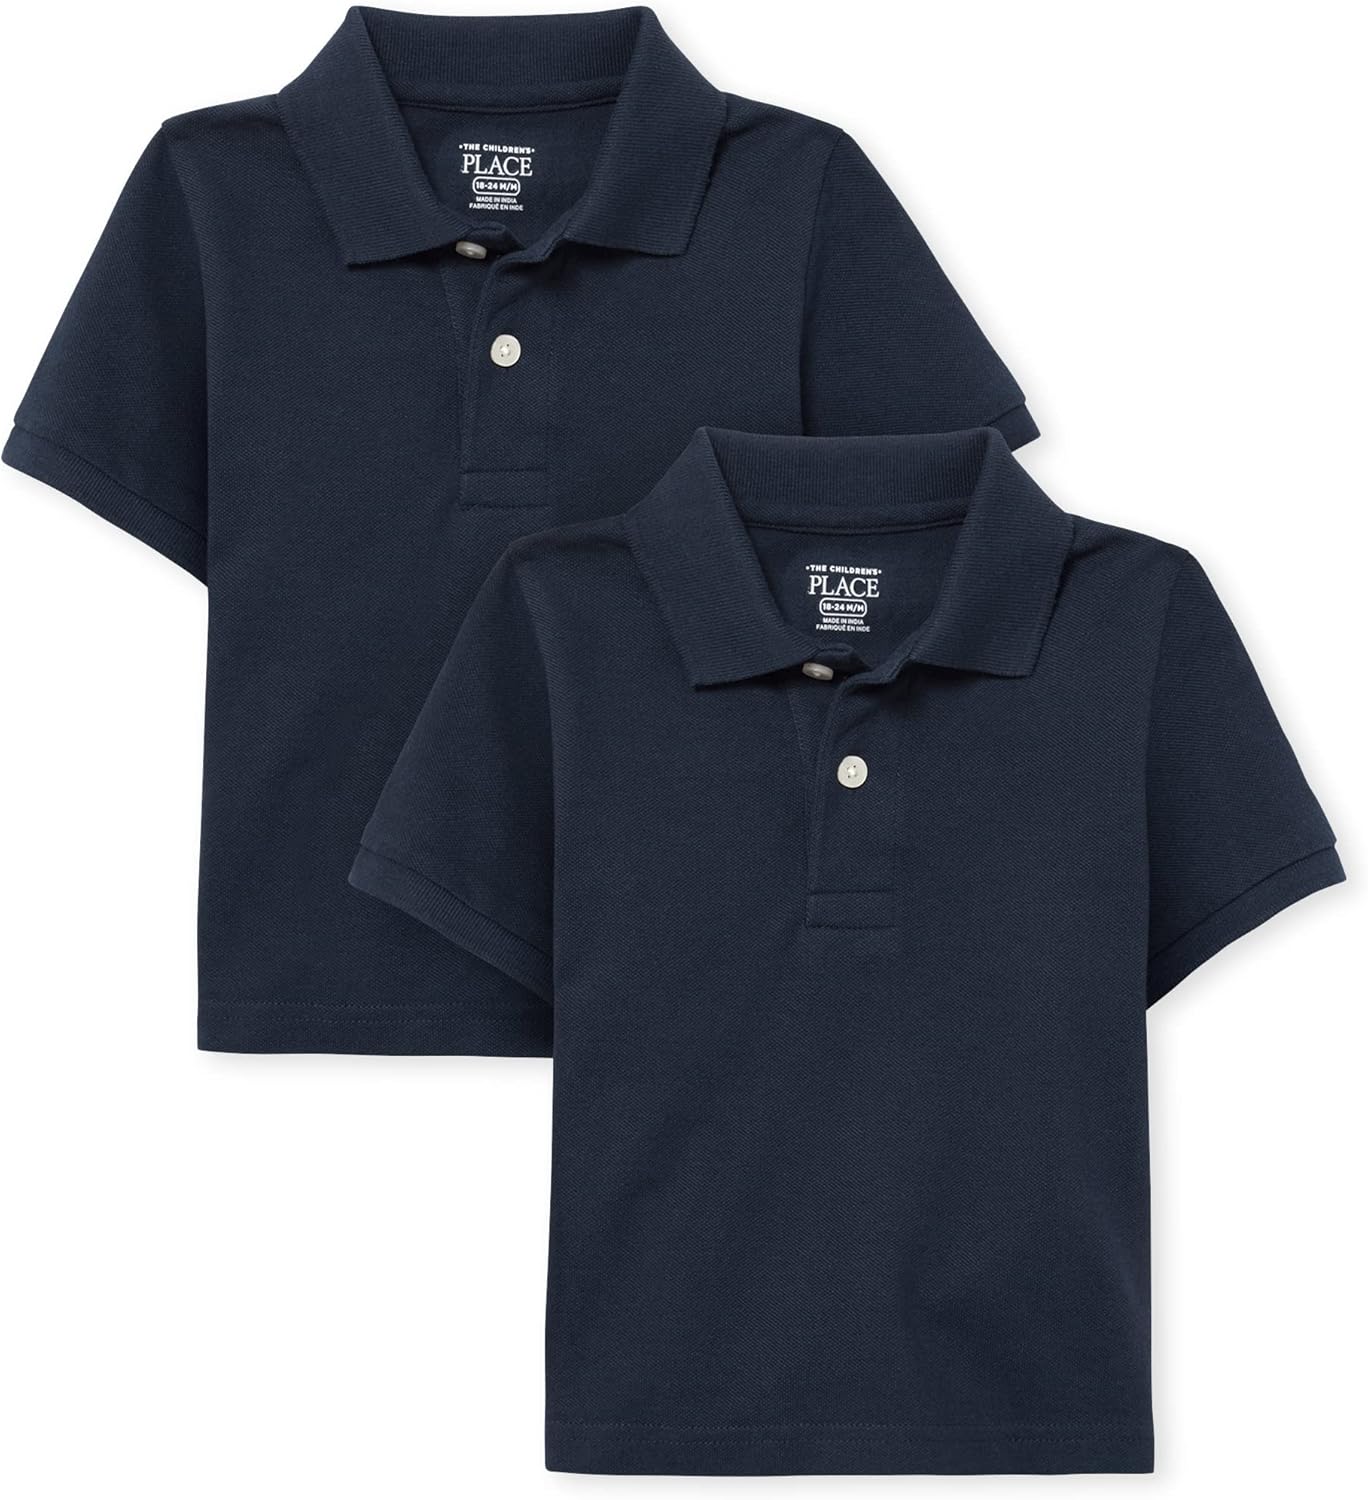 The Children’s Place Baby Boys Short Sleeve Pique Polo